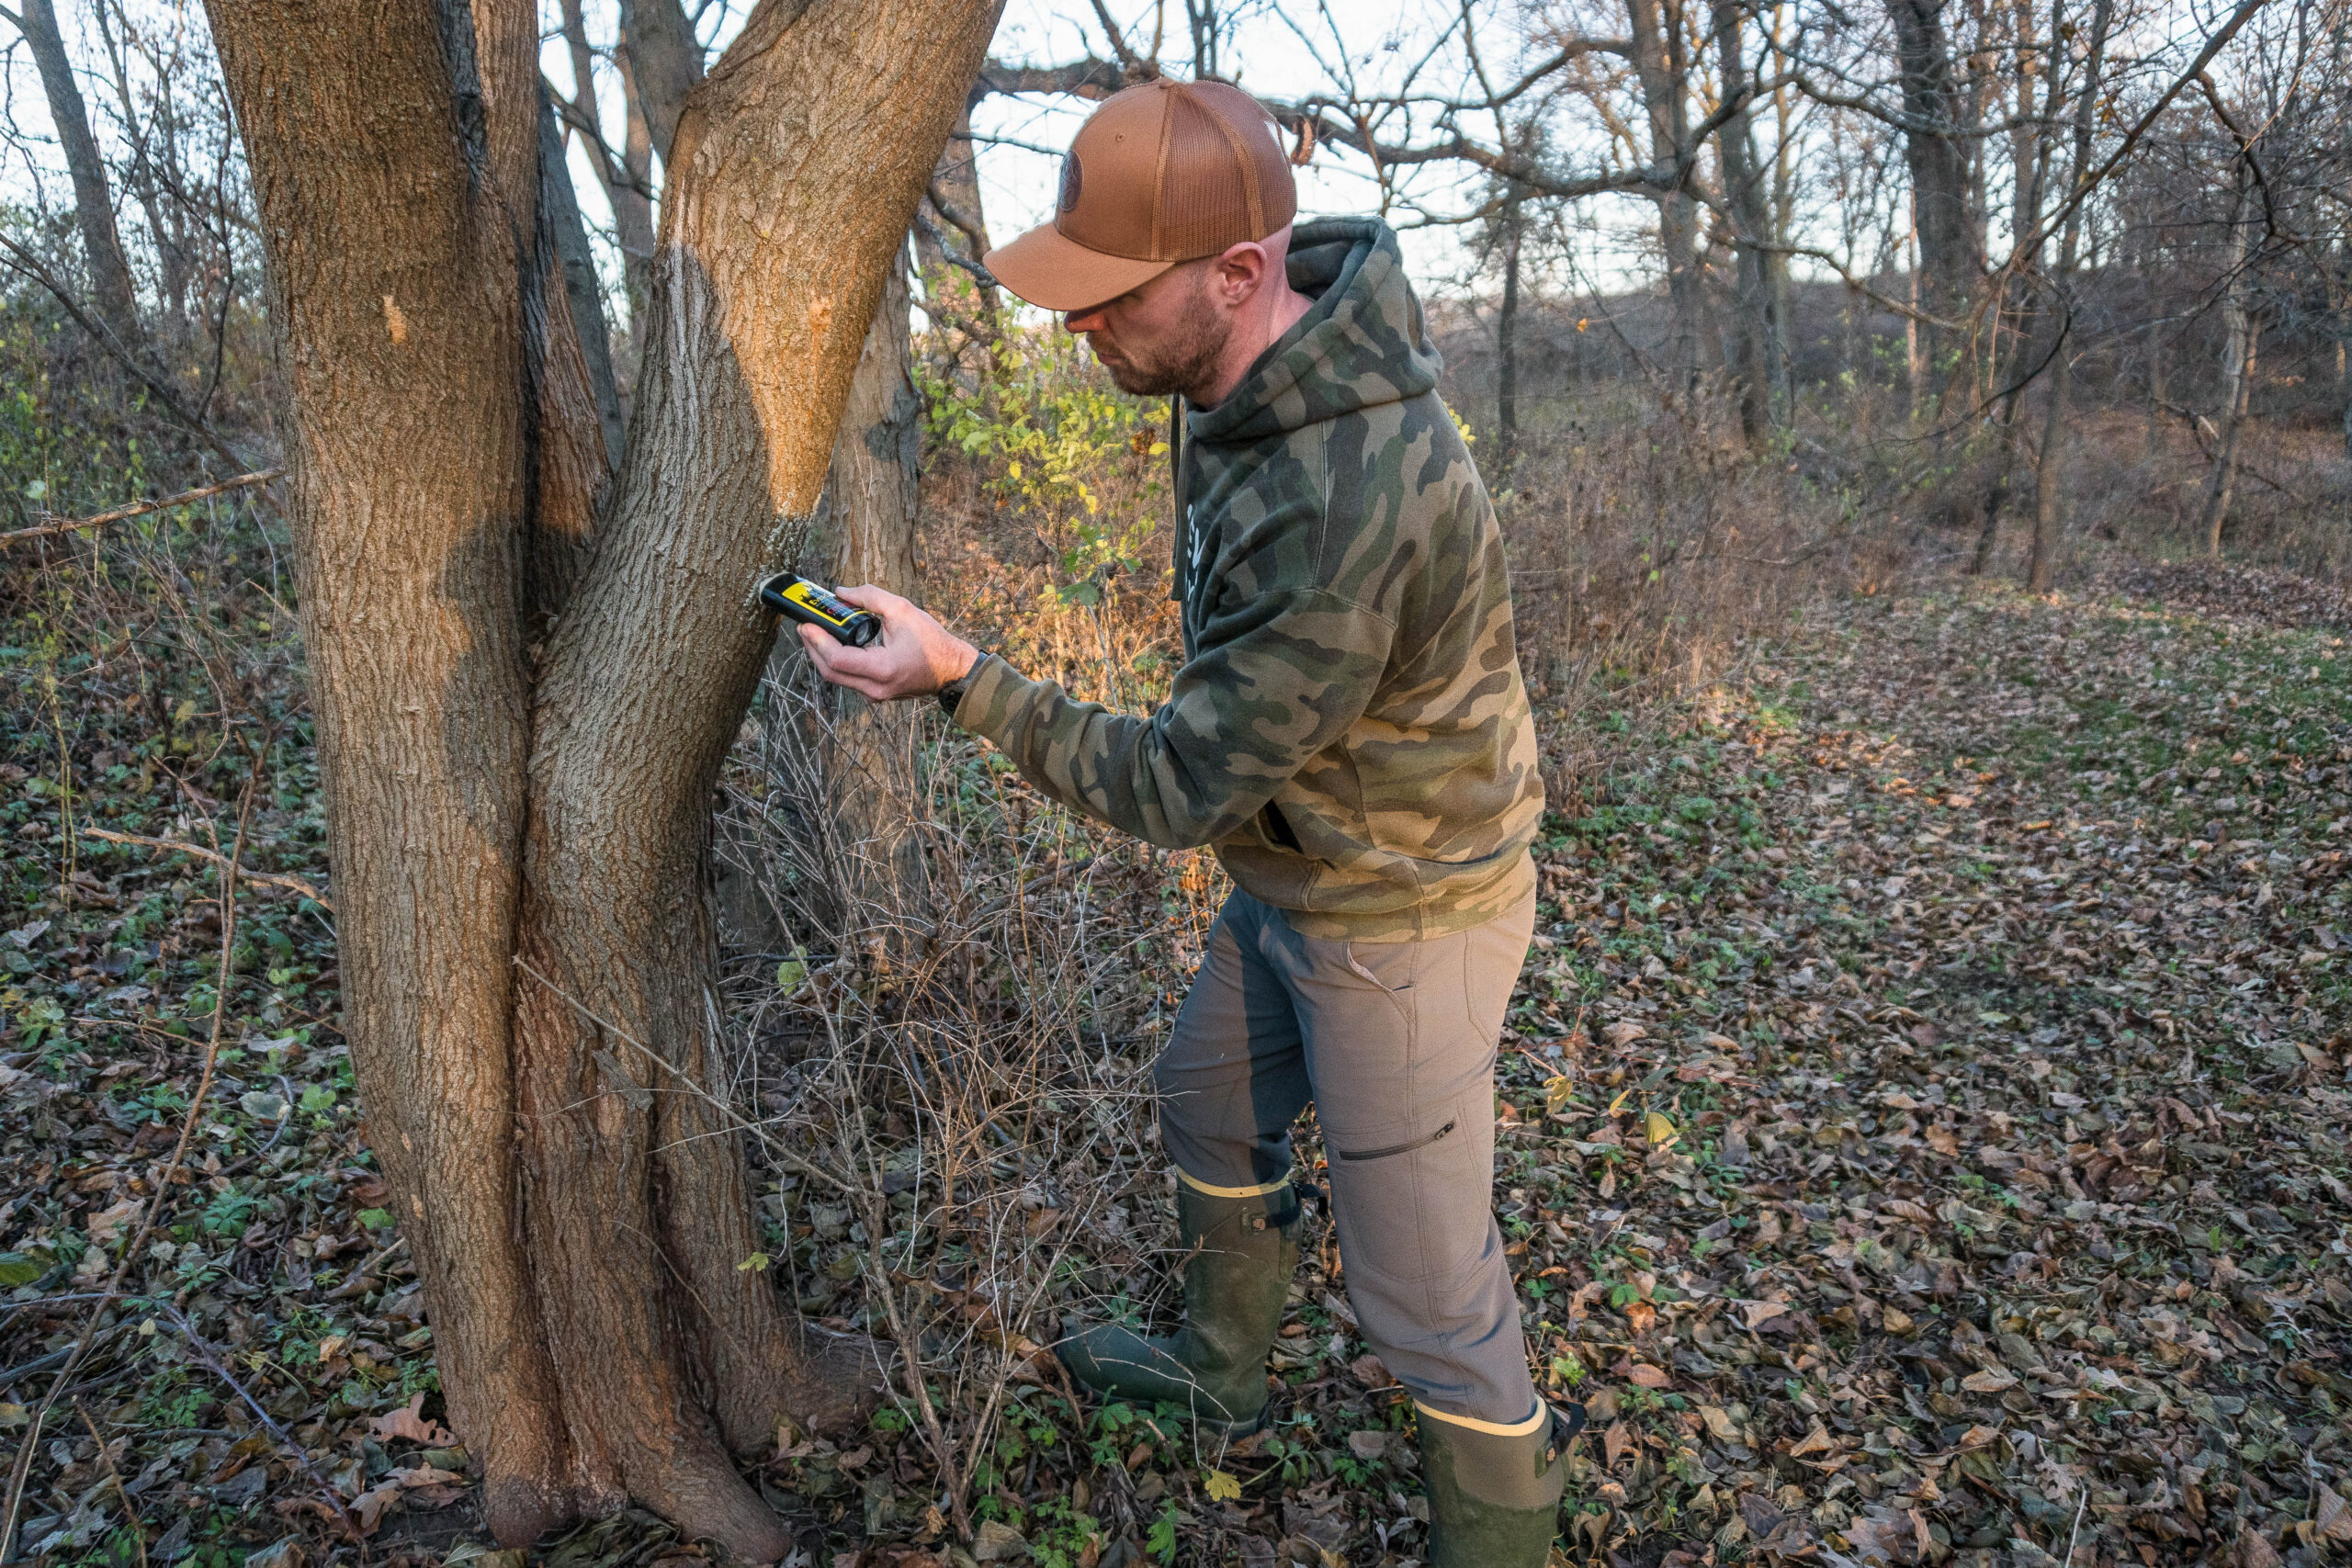 The author applies Ever Calm, one of the best deer attractants to a tree.